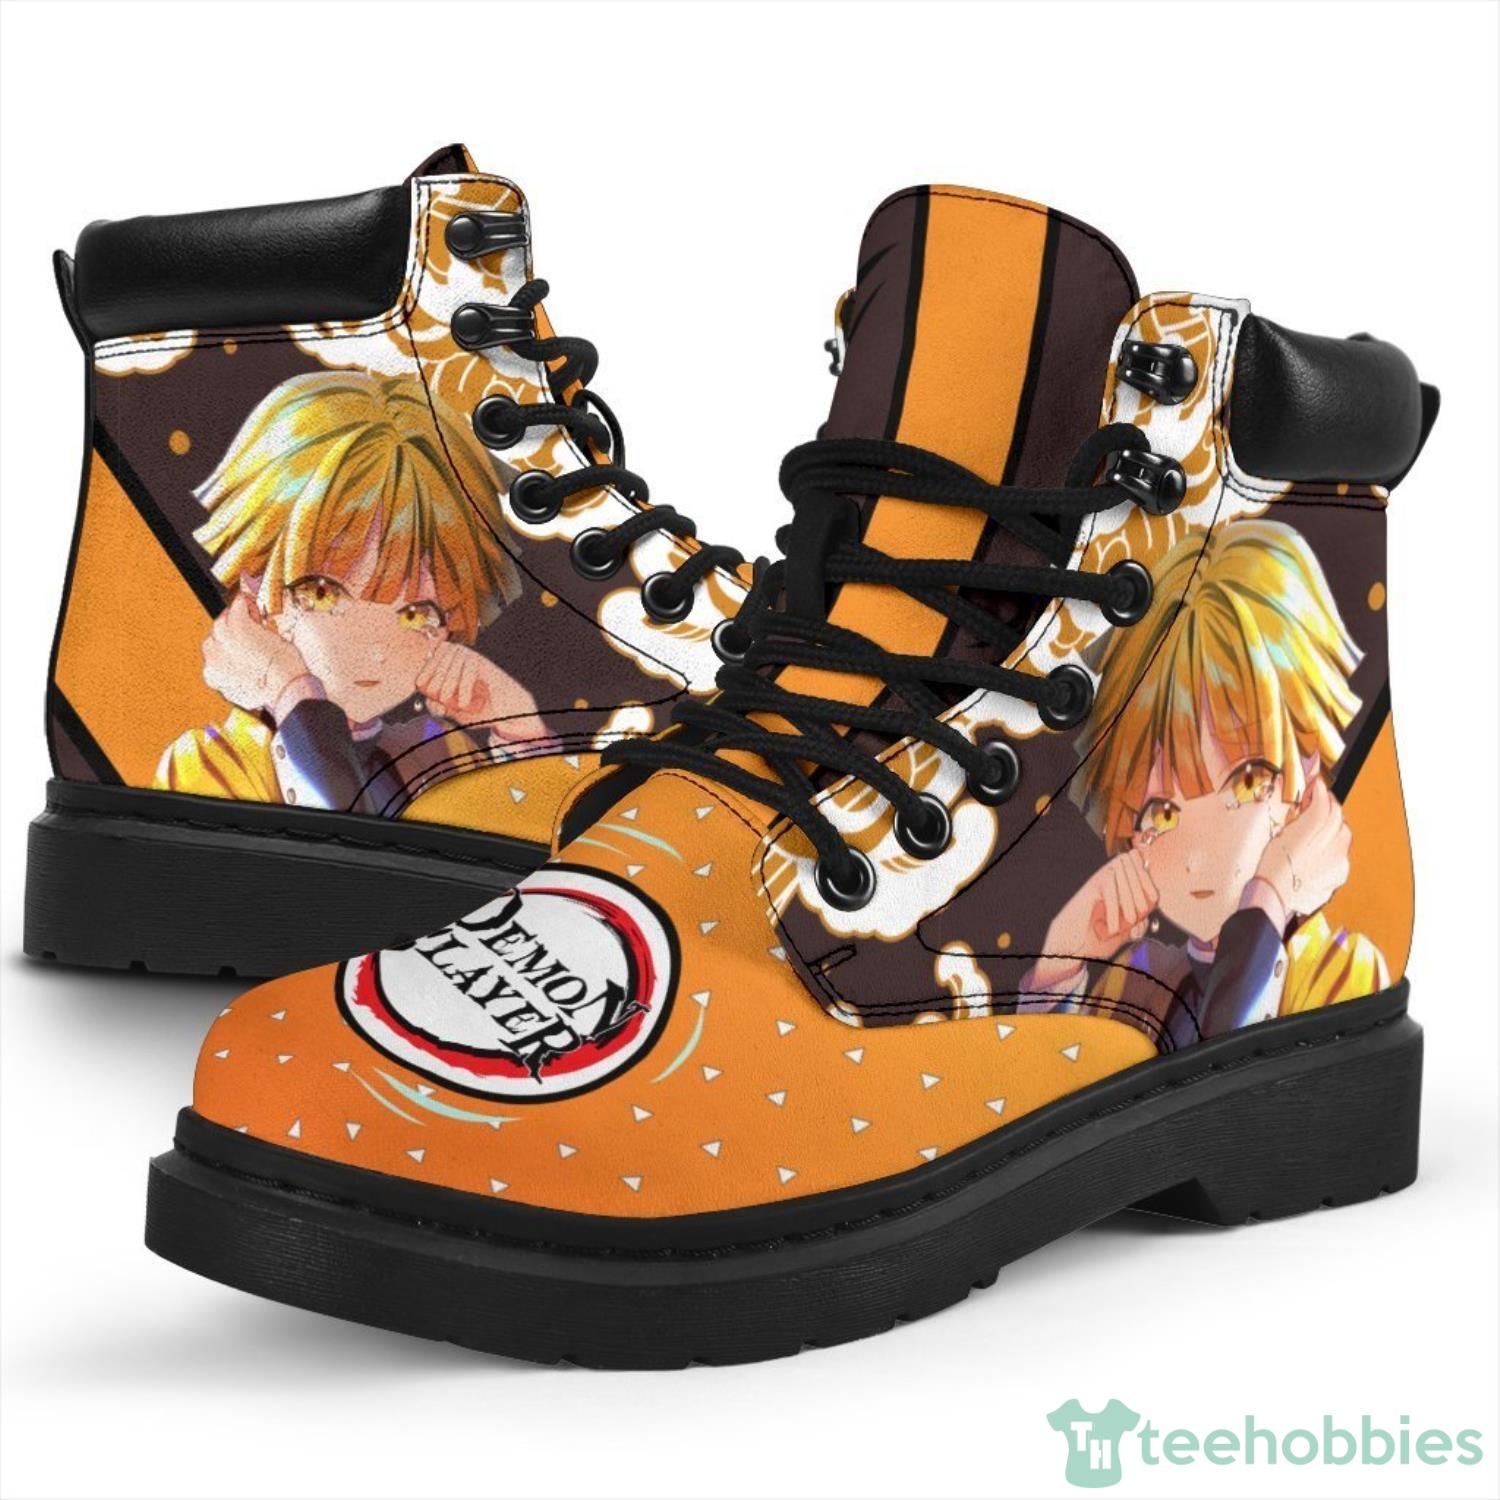 Fullmetal Alchemist Anime Winry Rockbell Cosplay Shoes Boots Custom Made